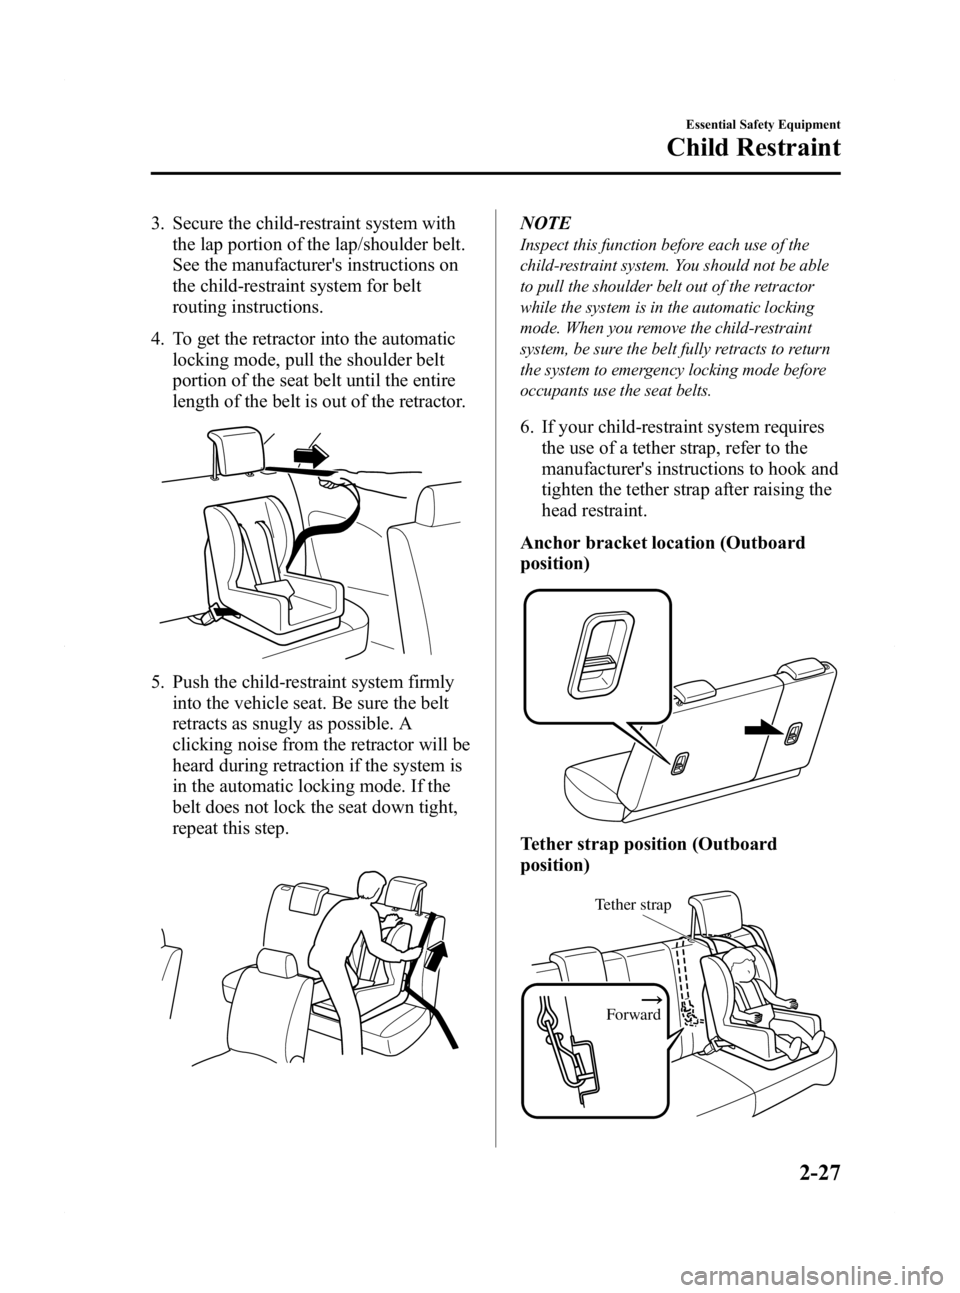 MAZDA MODEL 2 2011 Owners Guide Black plate (39,1)
3. Secure the child-restraint system withthe lap portion of the lap/shoulder belt.
See the manufacturers instructions on
the child-restraint system for belt
routing instructions.
4